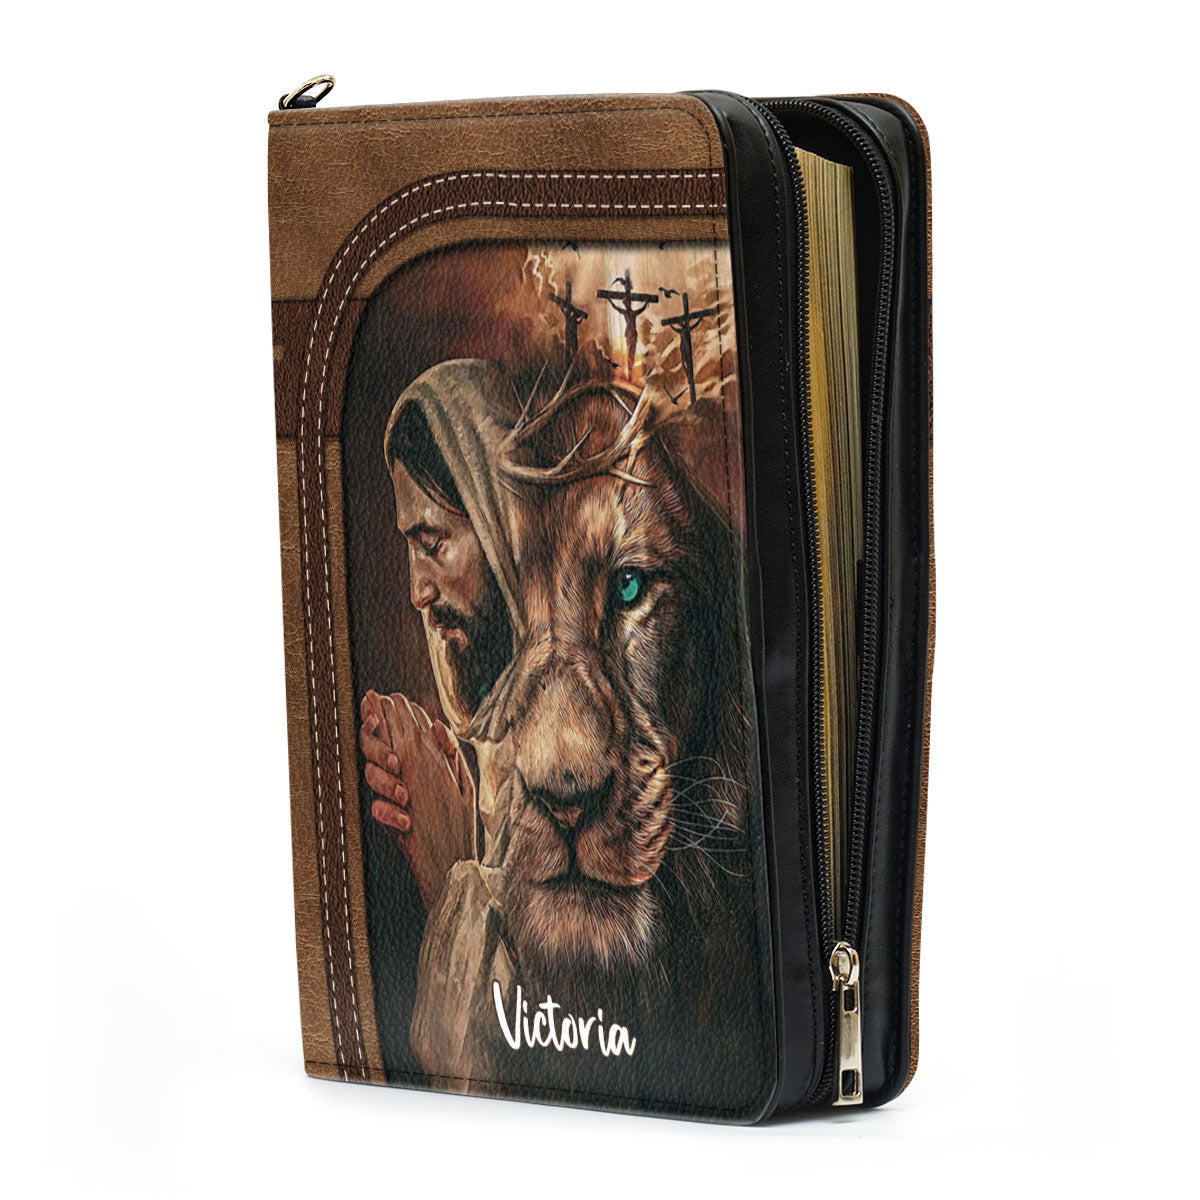 Must-Have Personalized Bible Cover - His Life Saved My Life HIHN312